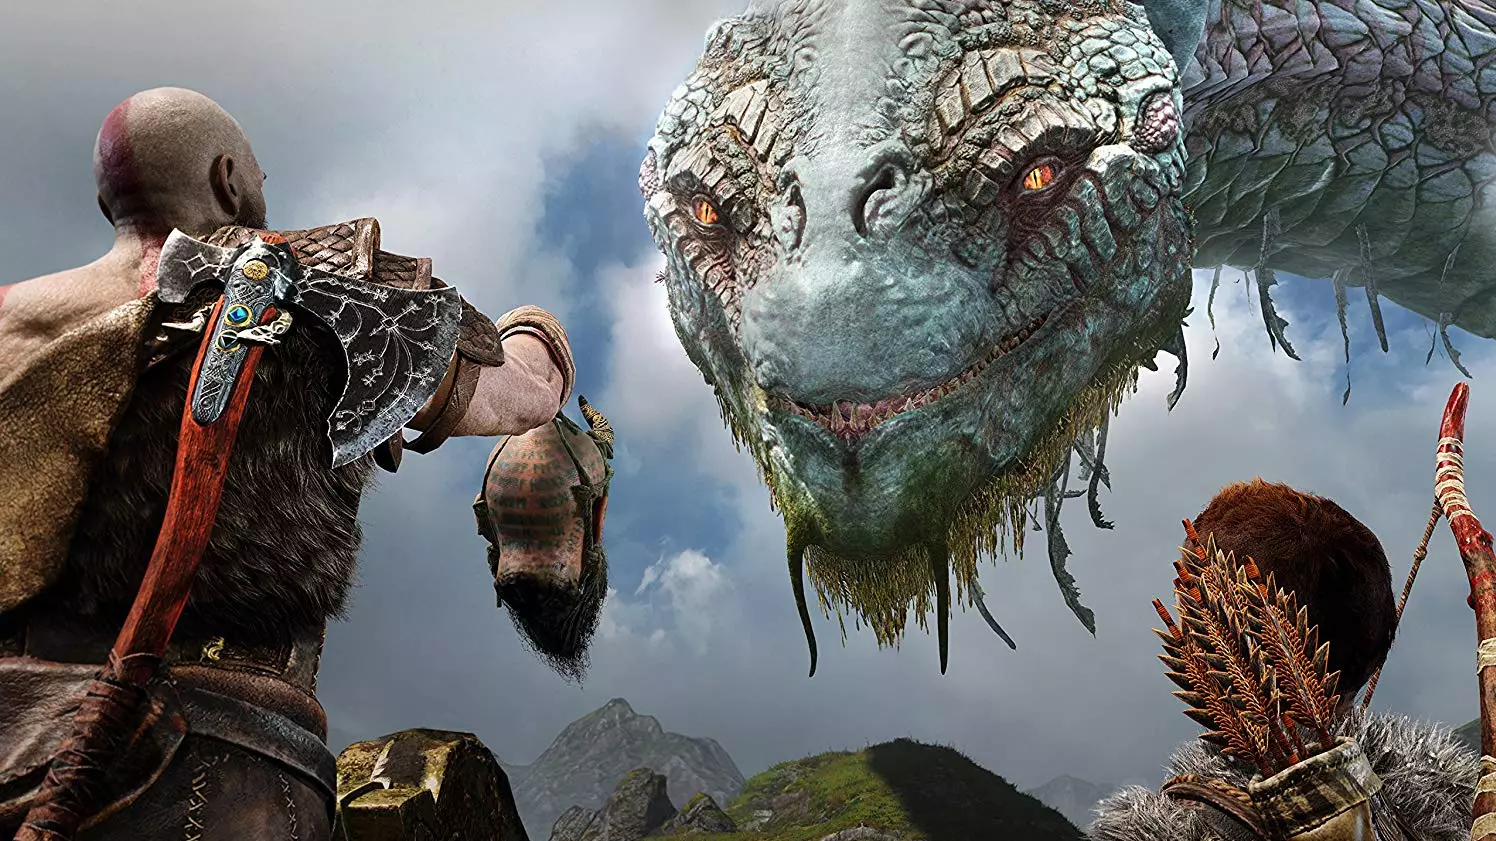 The Twisted Myths Of ‘God of War’ Are More Traditional Than You Think